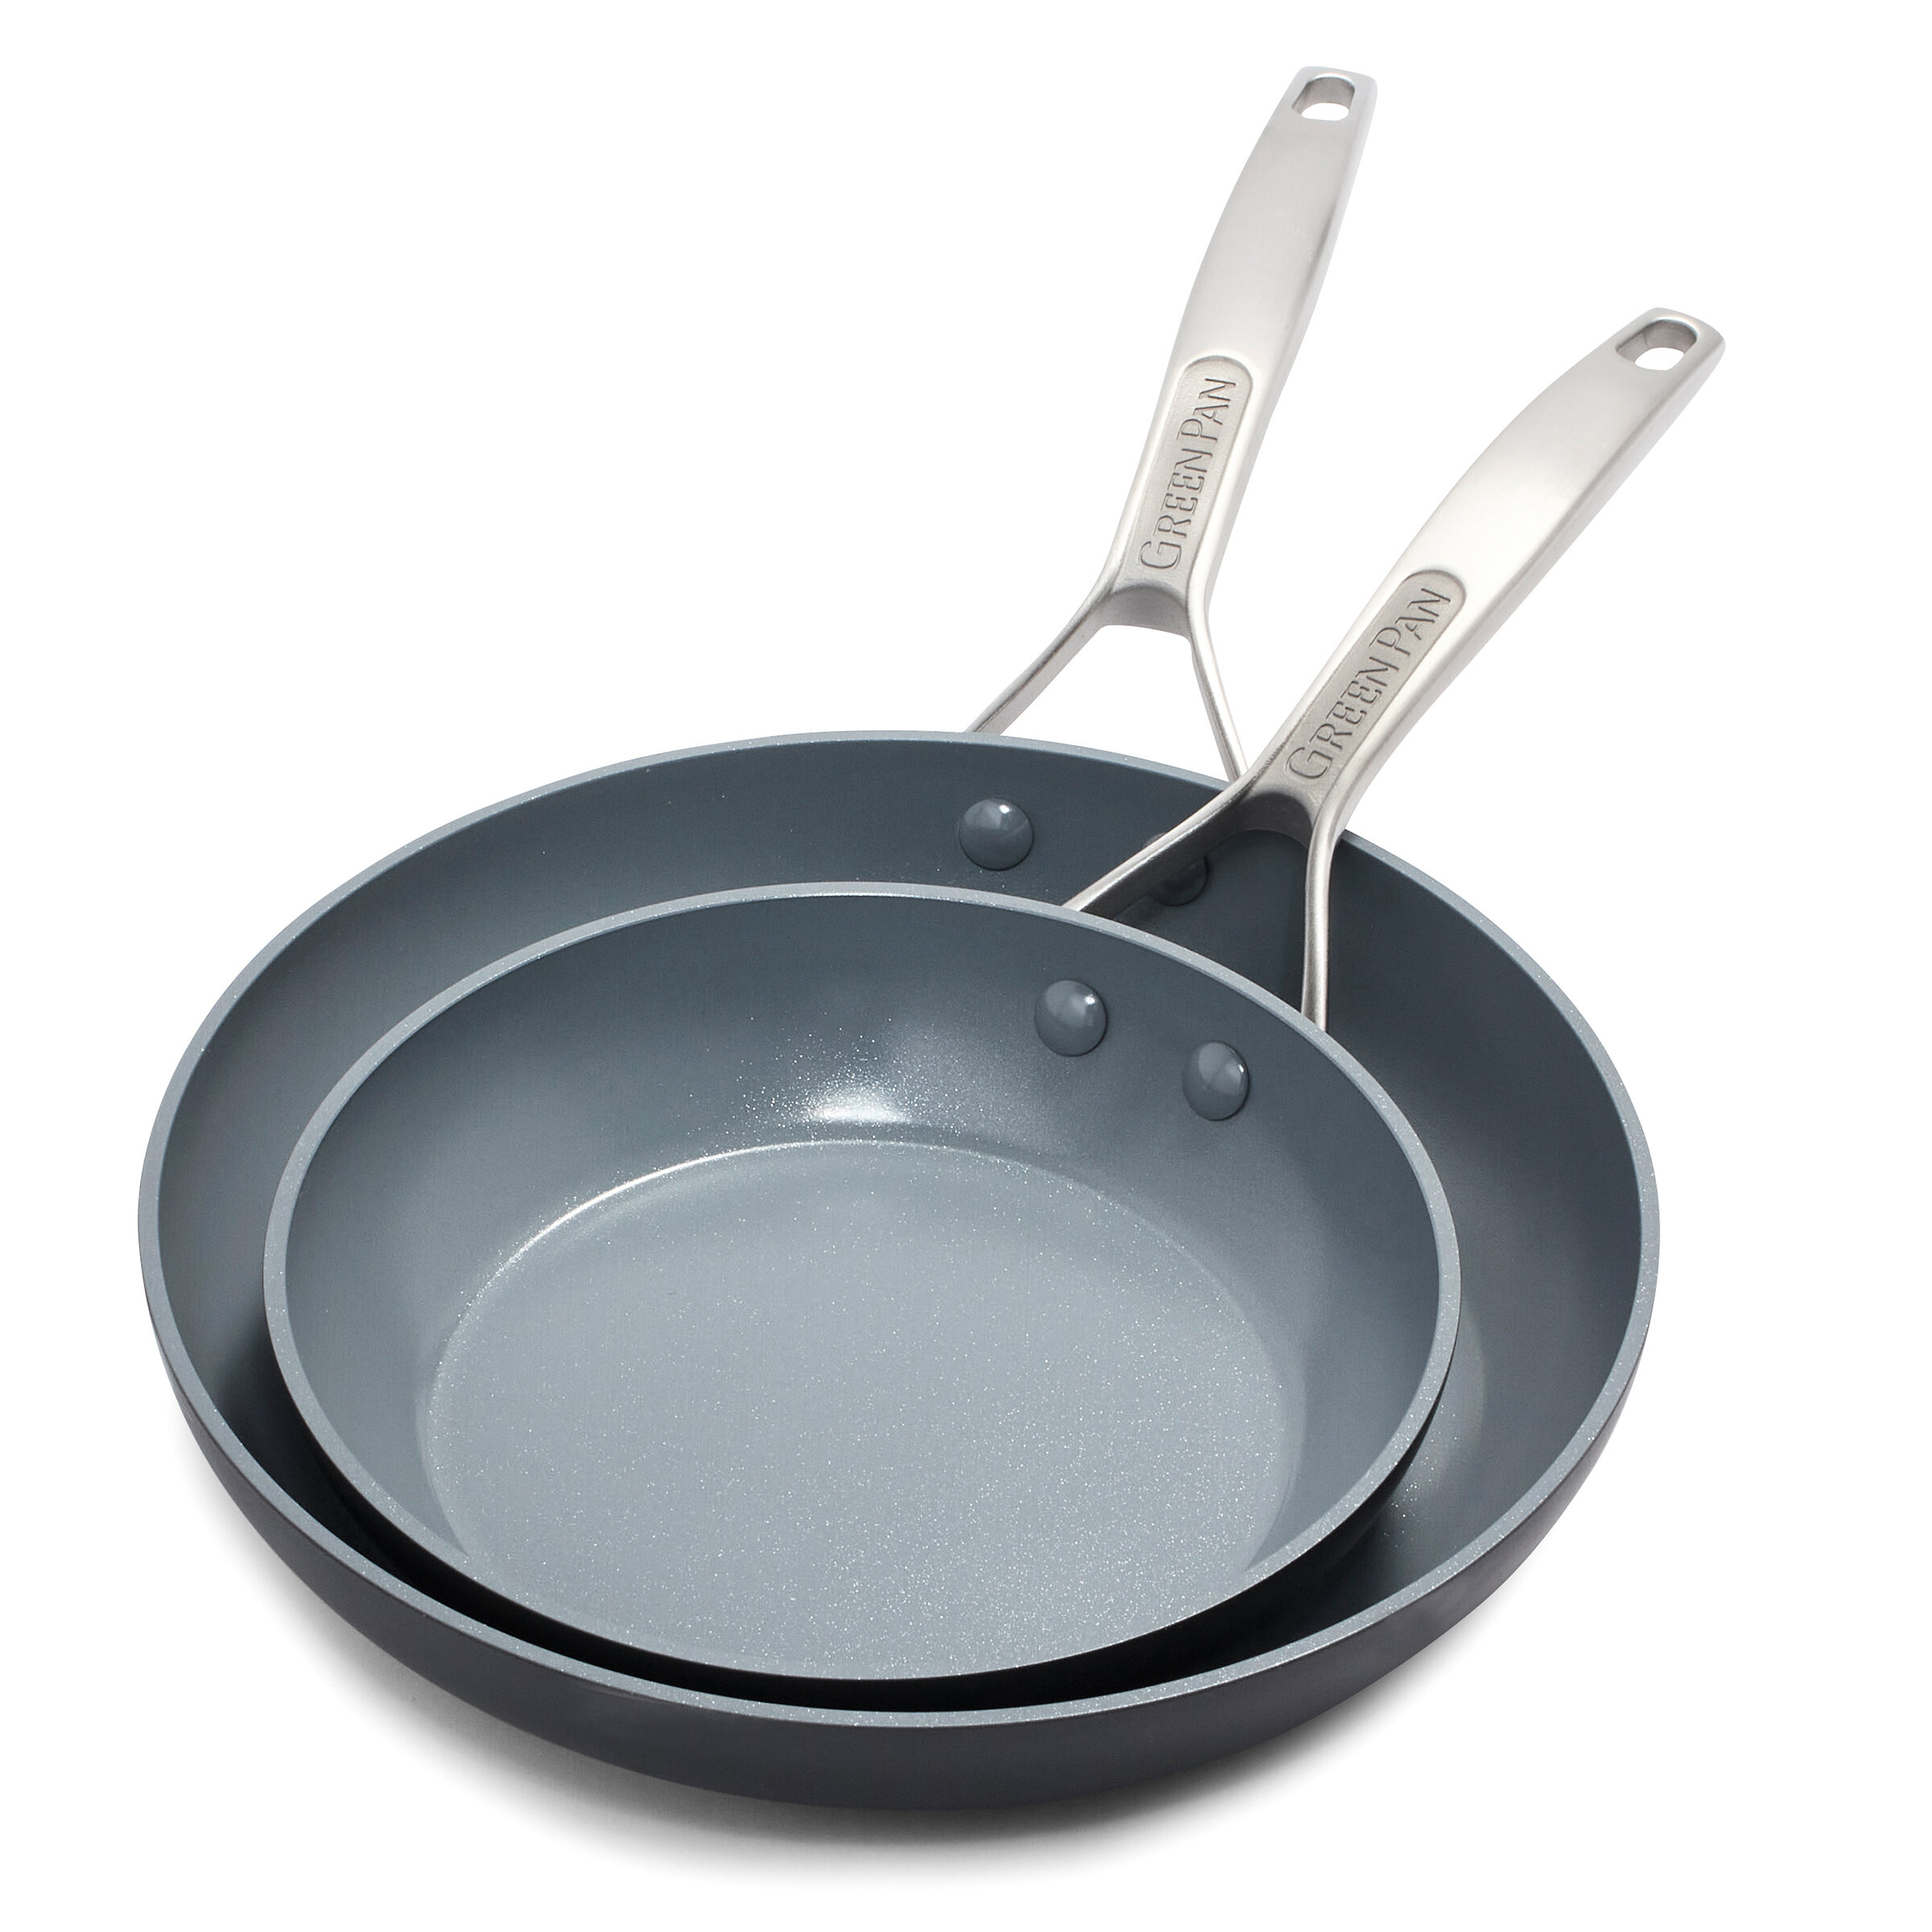 Performance Pro Ceramic Nonstick 11 Everyday Pan with Lid